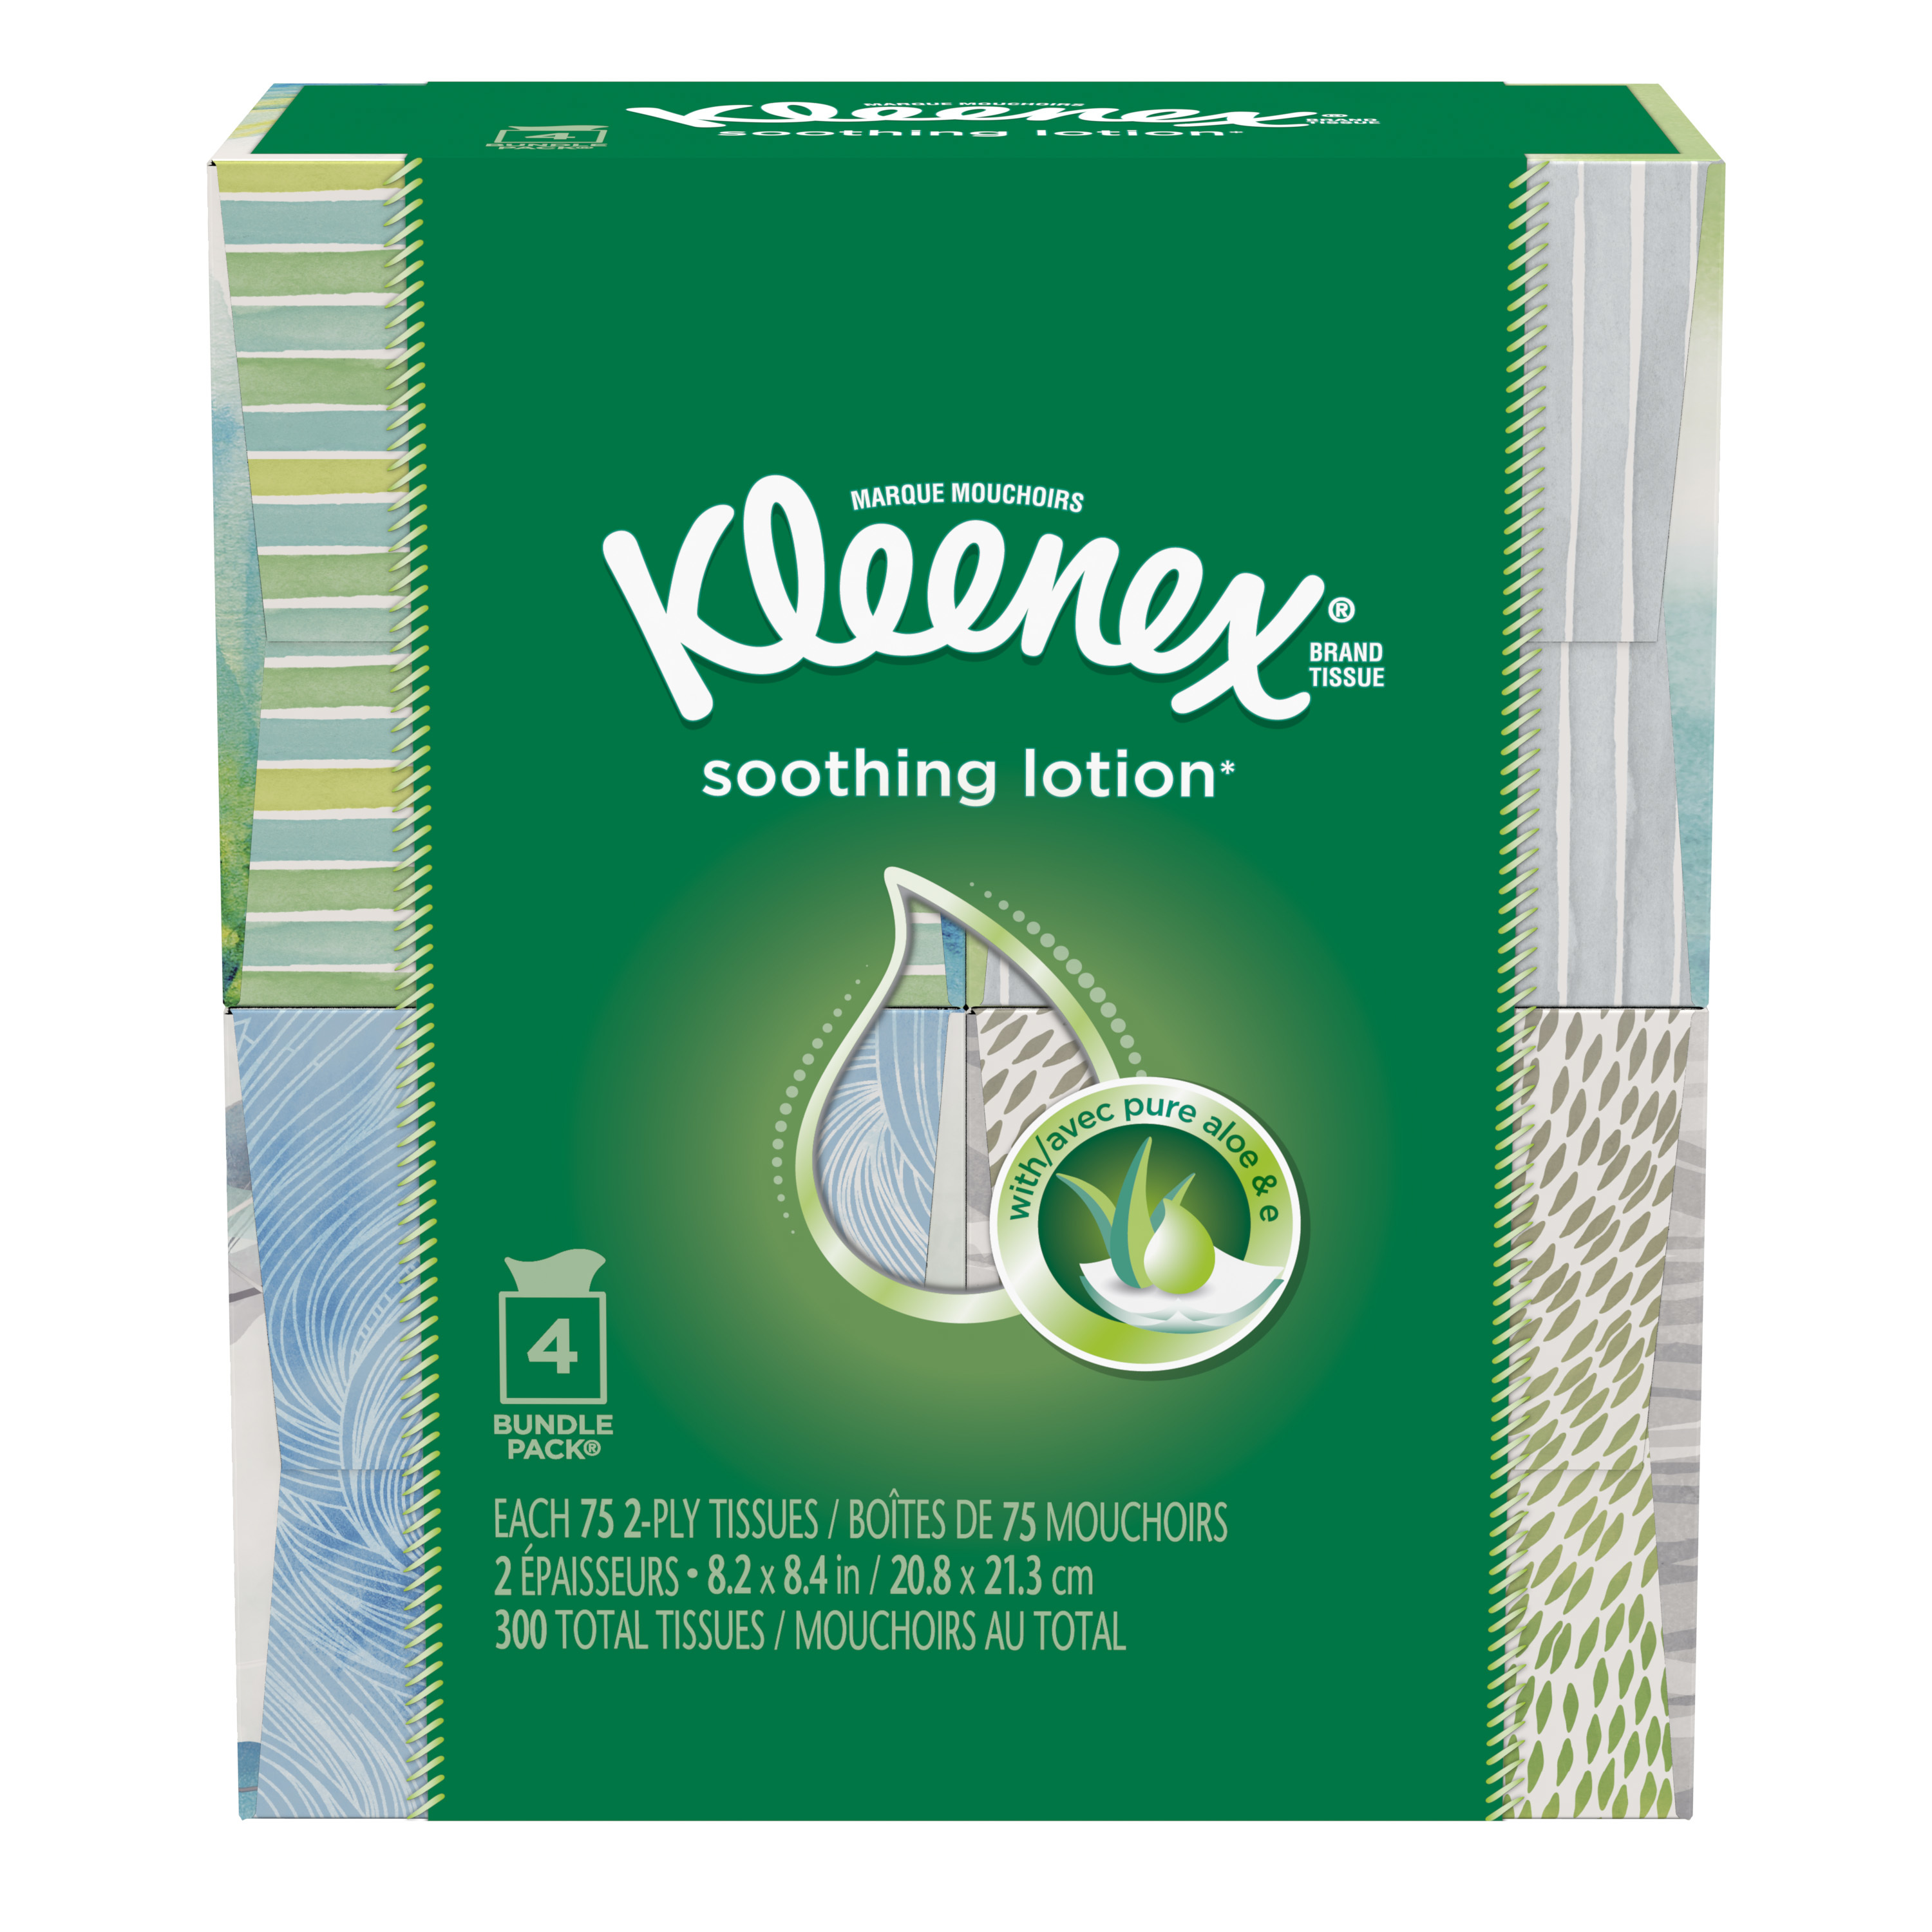 Kleenex Soothing Lotion Facial Tissues, 4 Cube Boxes, 75 White Tissues per Box, 3-Ply (300 Total Tissues) - image 1 of 4